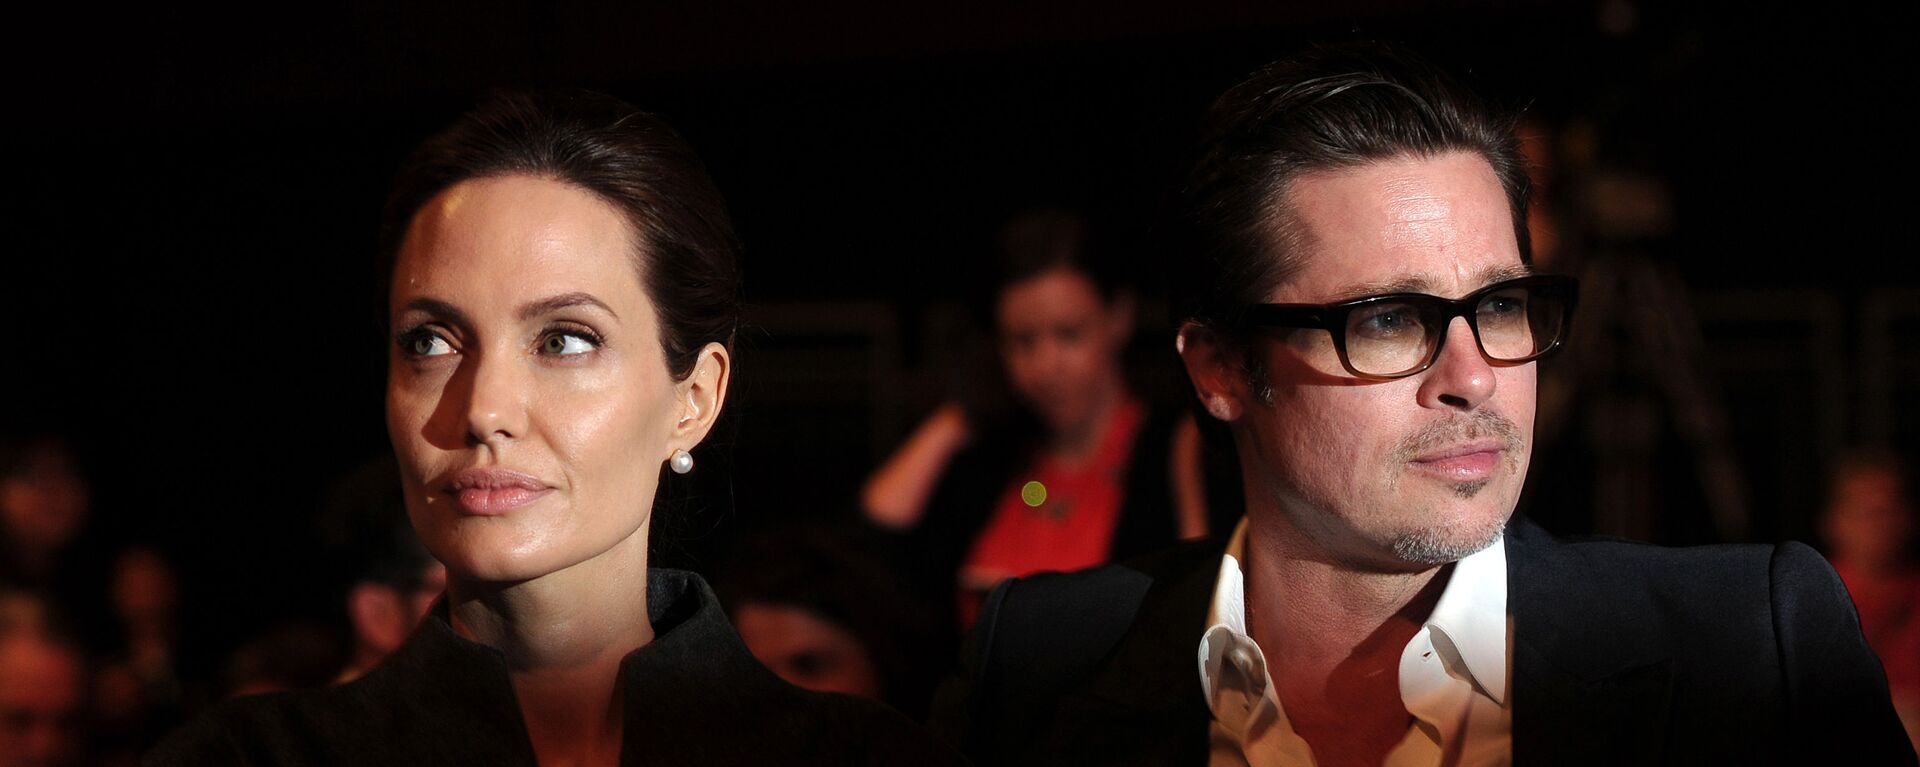 This file photo taken on June 13, 2014 shows US actress and special UN envoy Angelina Jolie (L) and her husband US actor Brad Pitt attending the fourth day of the Global Summit to End Sexual Violence in Conflict in London. - Sputnik International, 1920, 12.06.2022